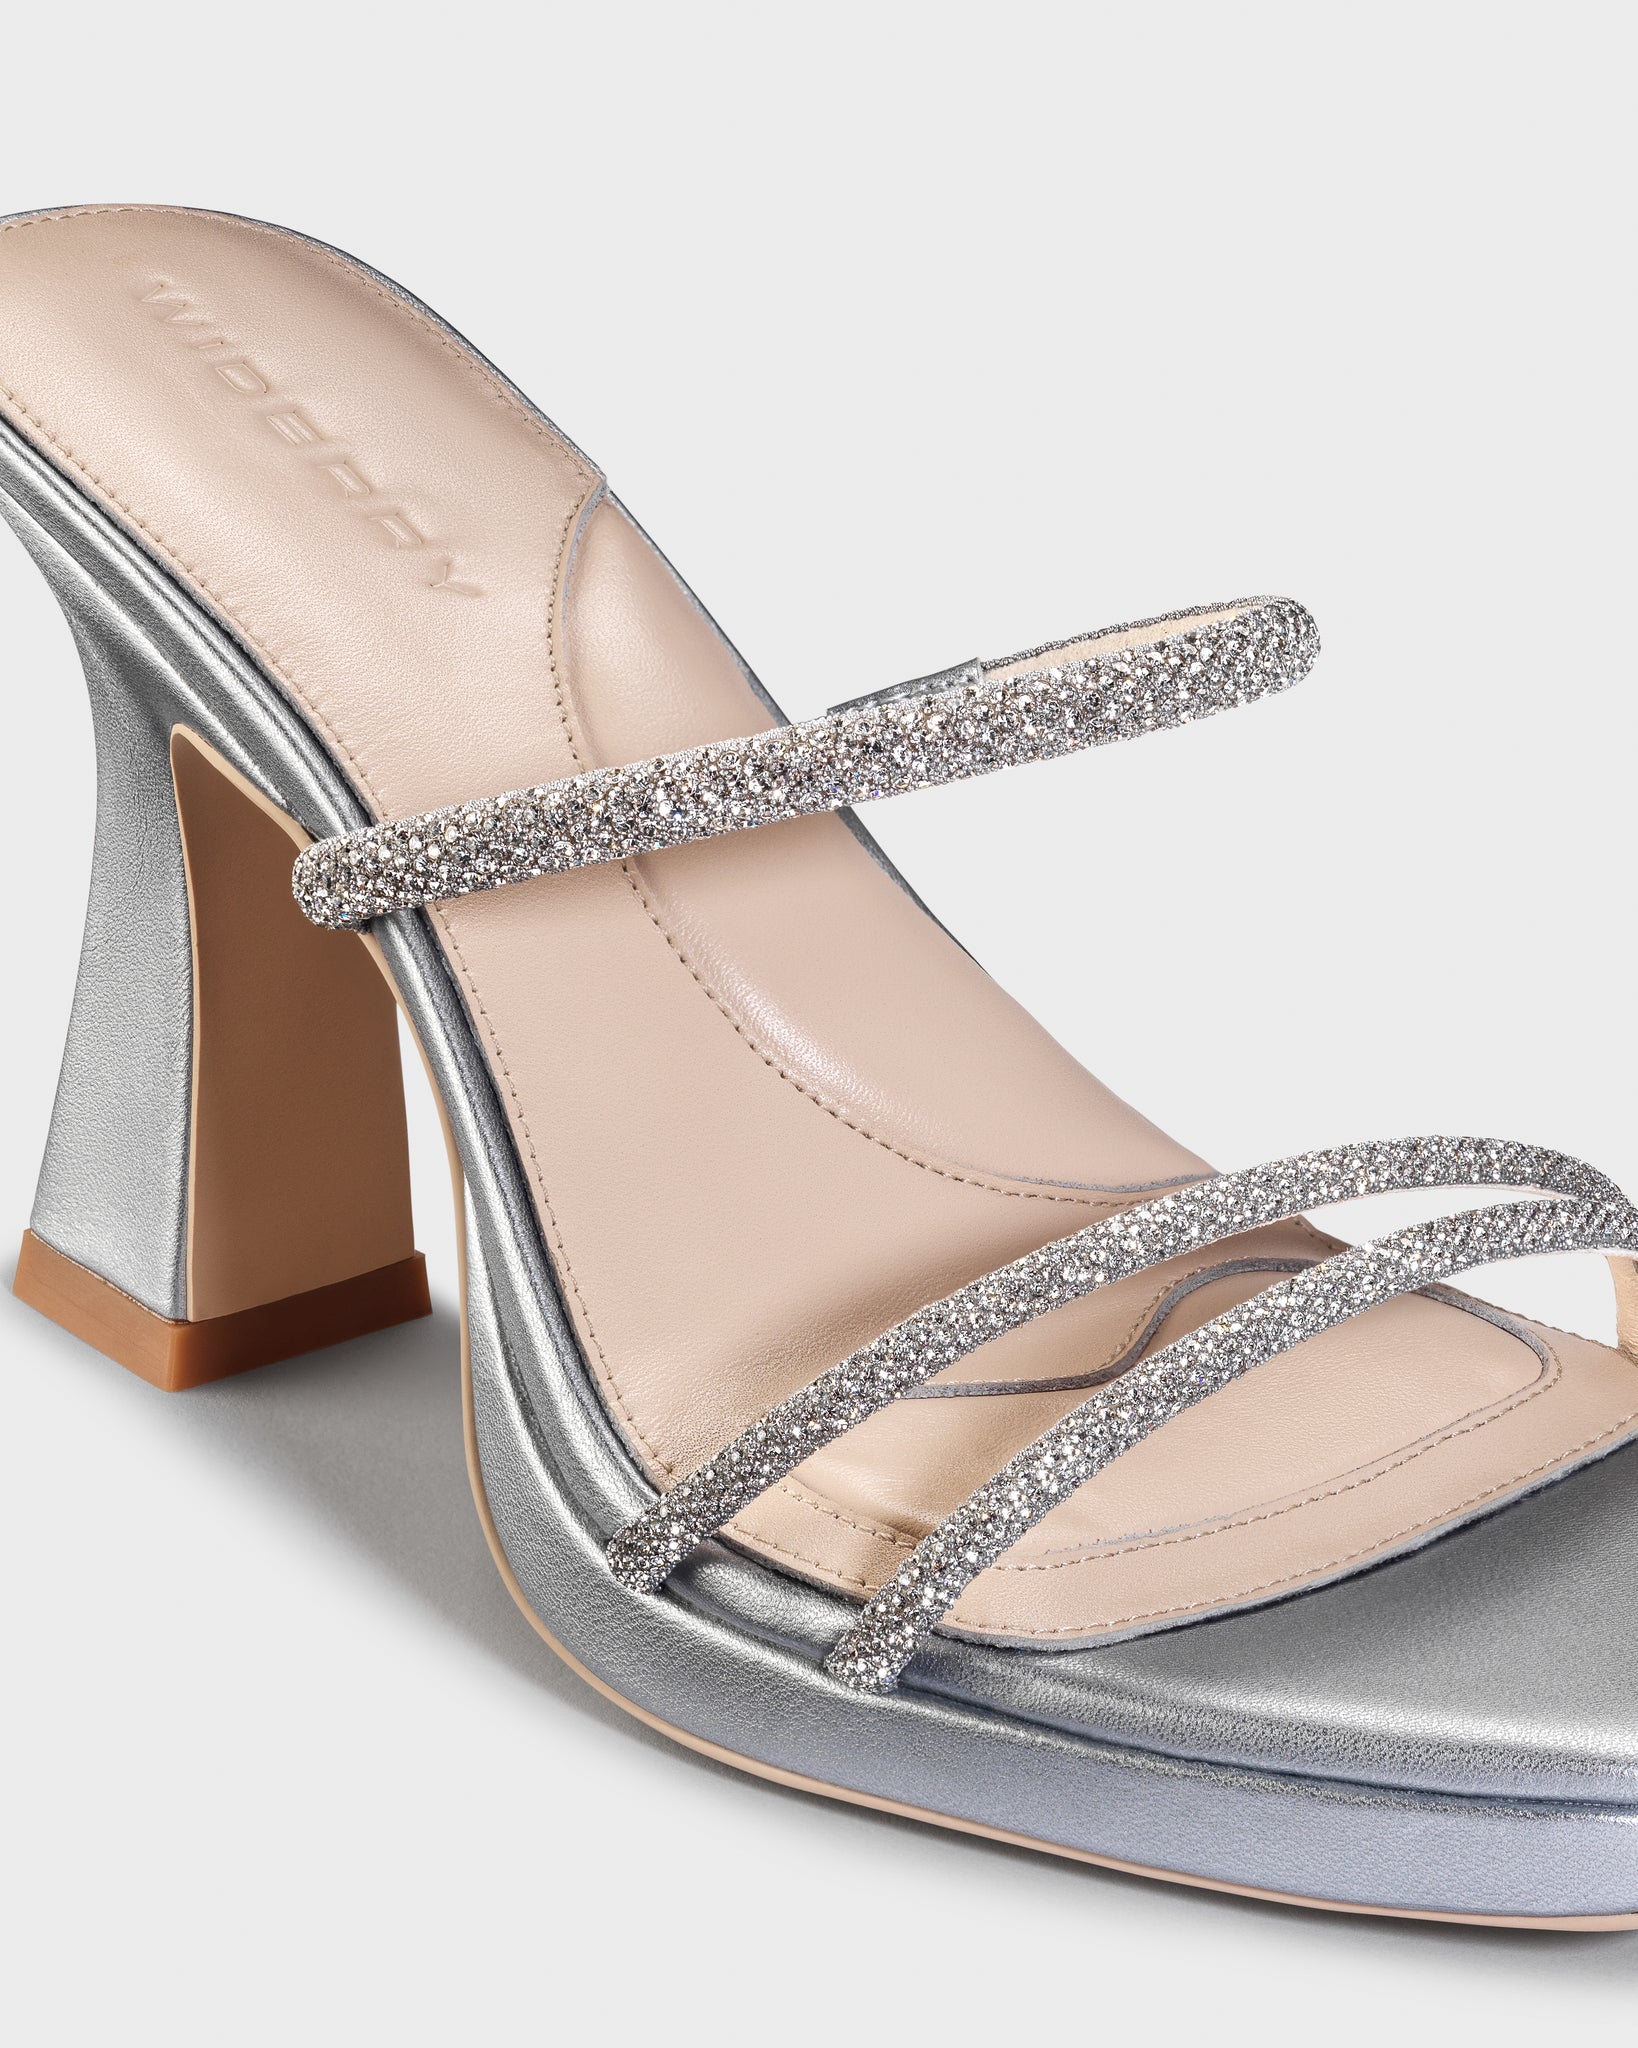 Widerry Gloria silver wide fit heels, close up